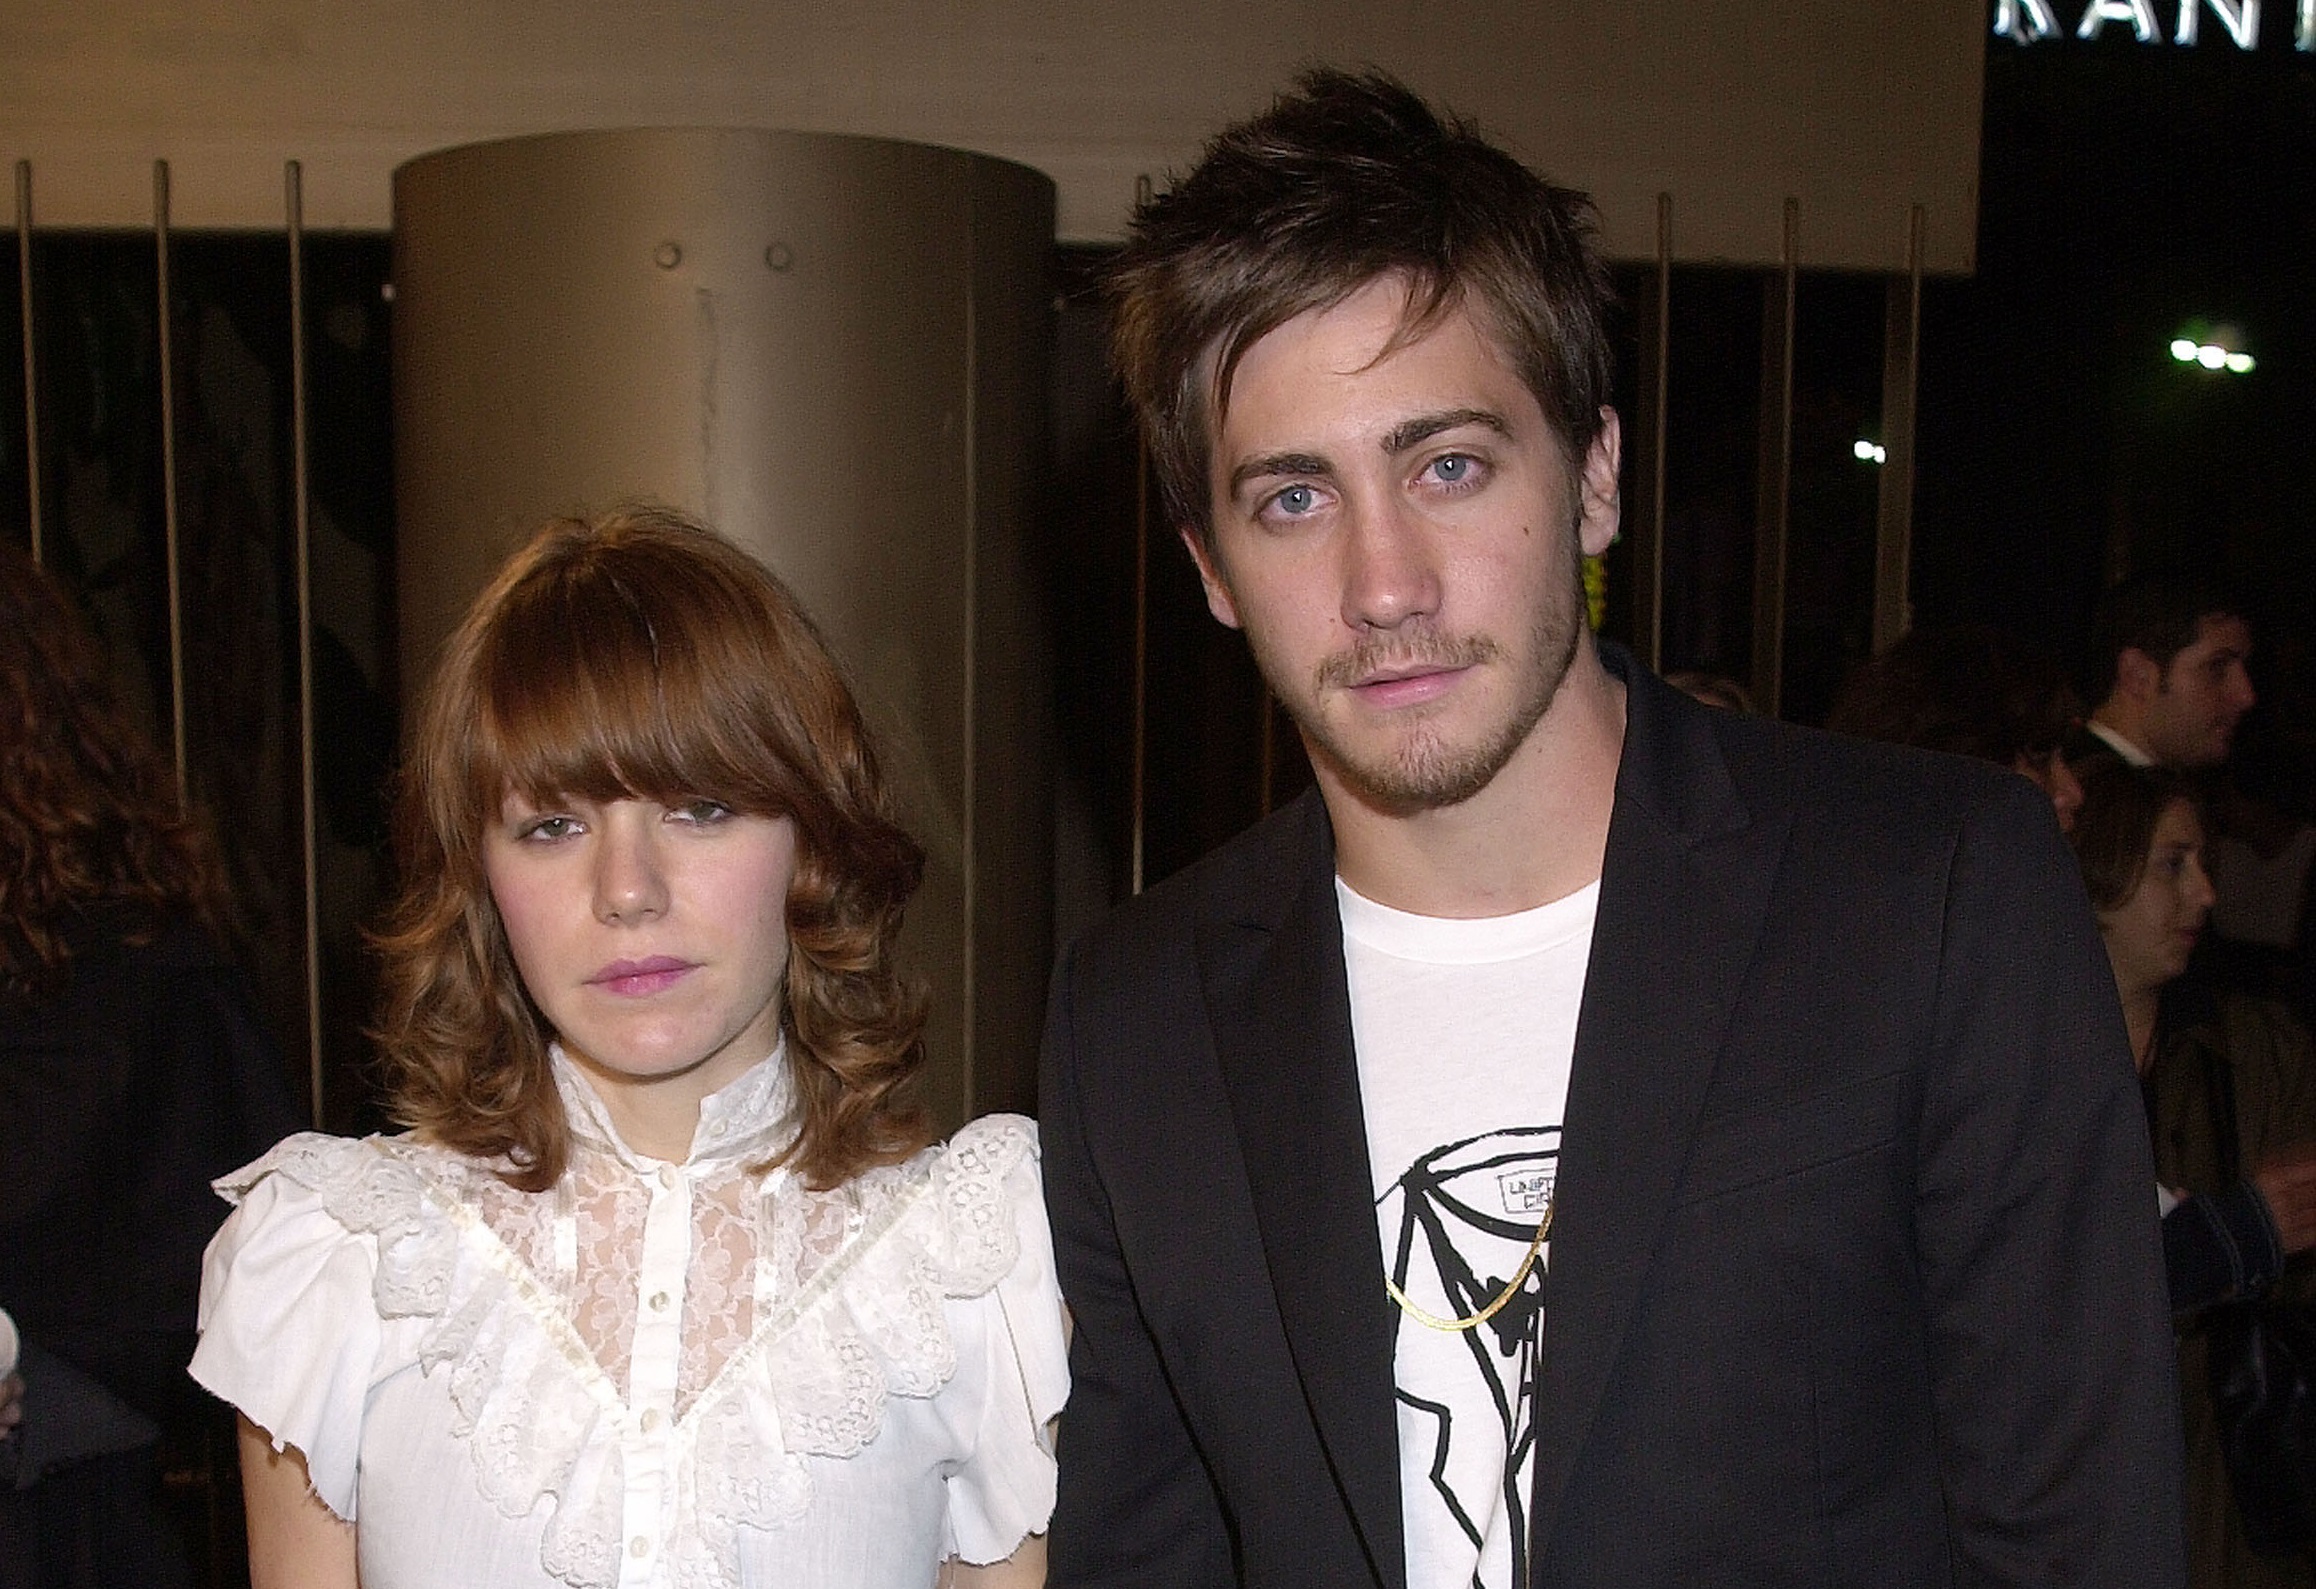 Jake Gyllenhaal Did Not Dump Taylor Swift For Her, Says Jenny Lewis